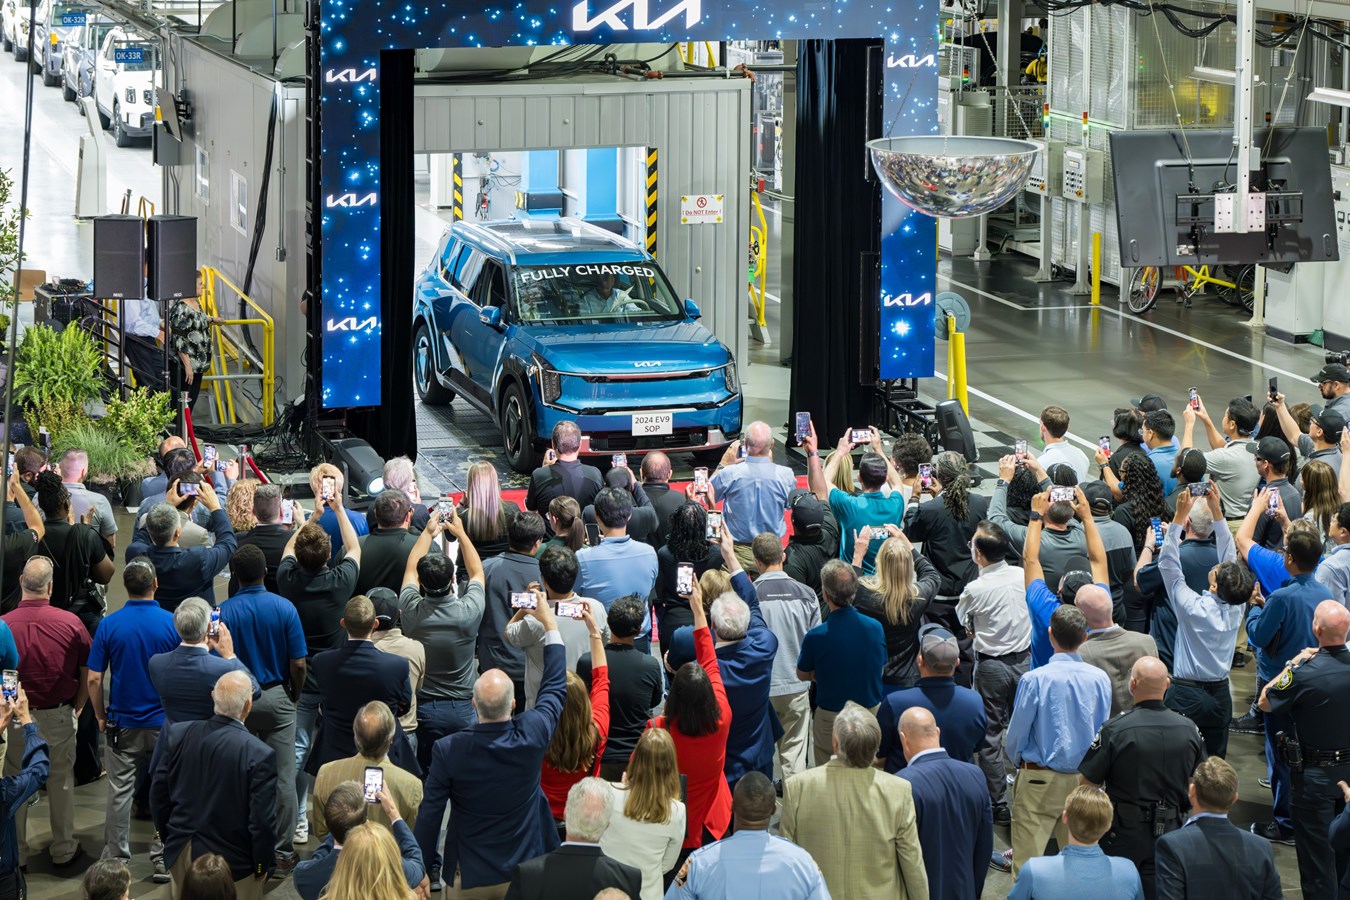 On Thursday, May 30, 2024, Kia Georgia, Inc. held a Start of Production ceremony for the all-electric 2025 Kia EV9 SUV